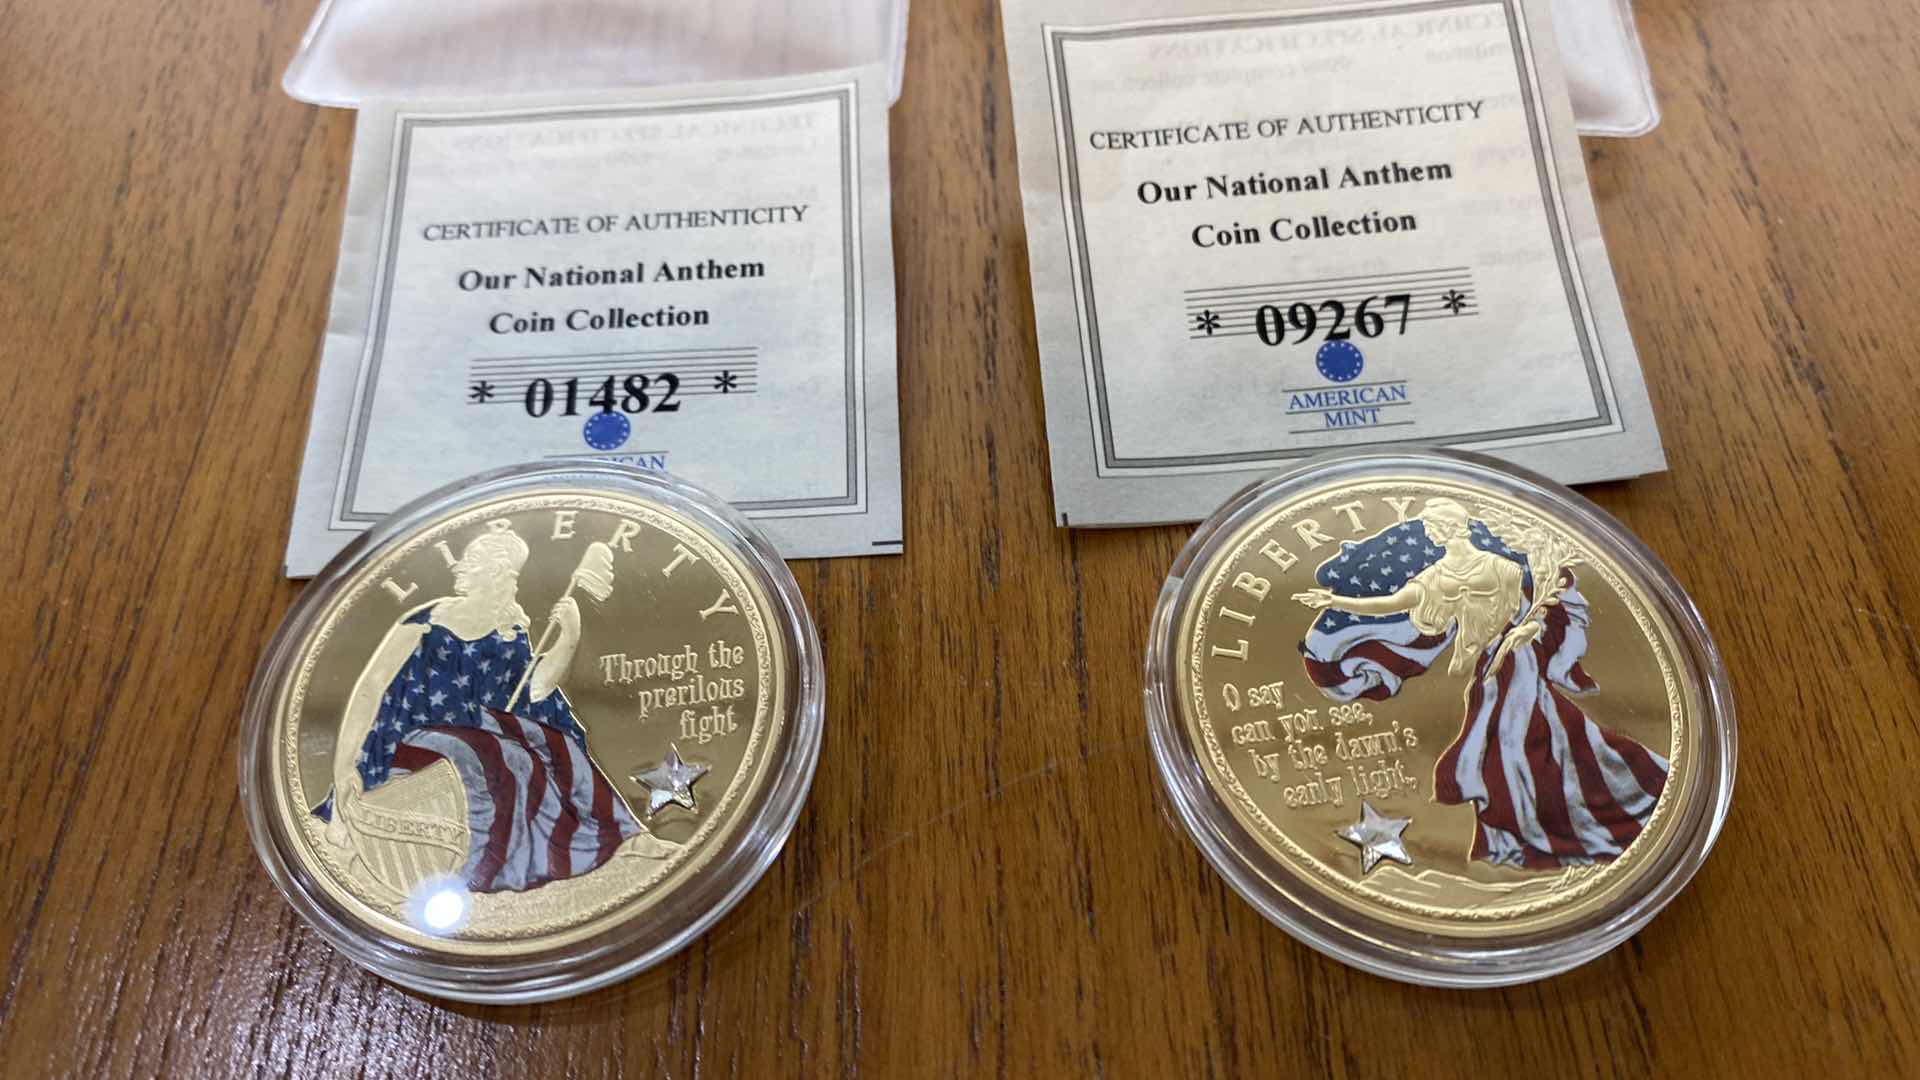 Photo 4 of PAIR OF AMERICAN MINT TRIBUTE TO NATIONAL ANTHEM COMMEMORATIVE COIN SWAROVSKI CRYSTAL 